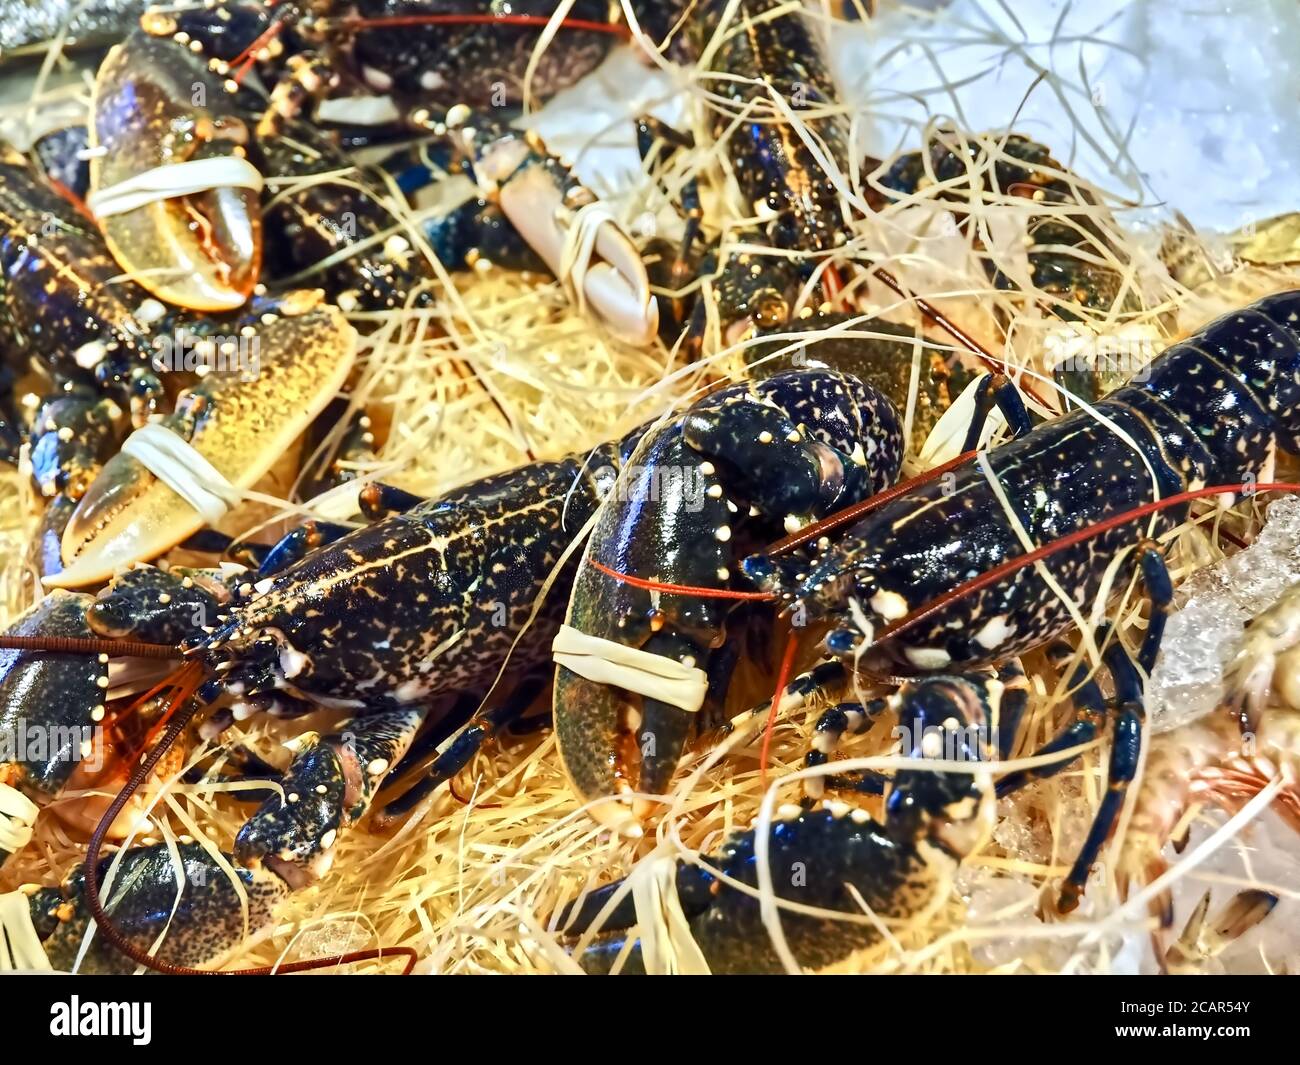 Living black lobster at a food market Stock Photo